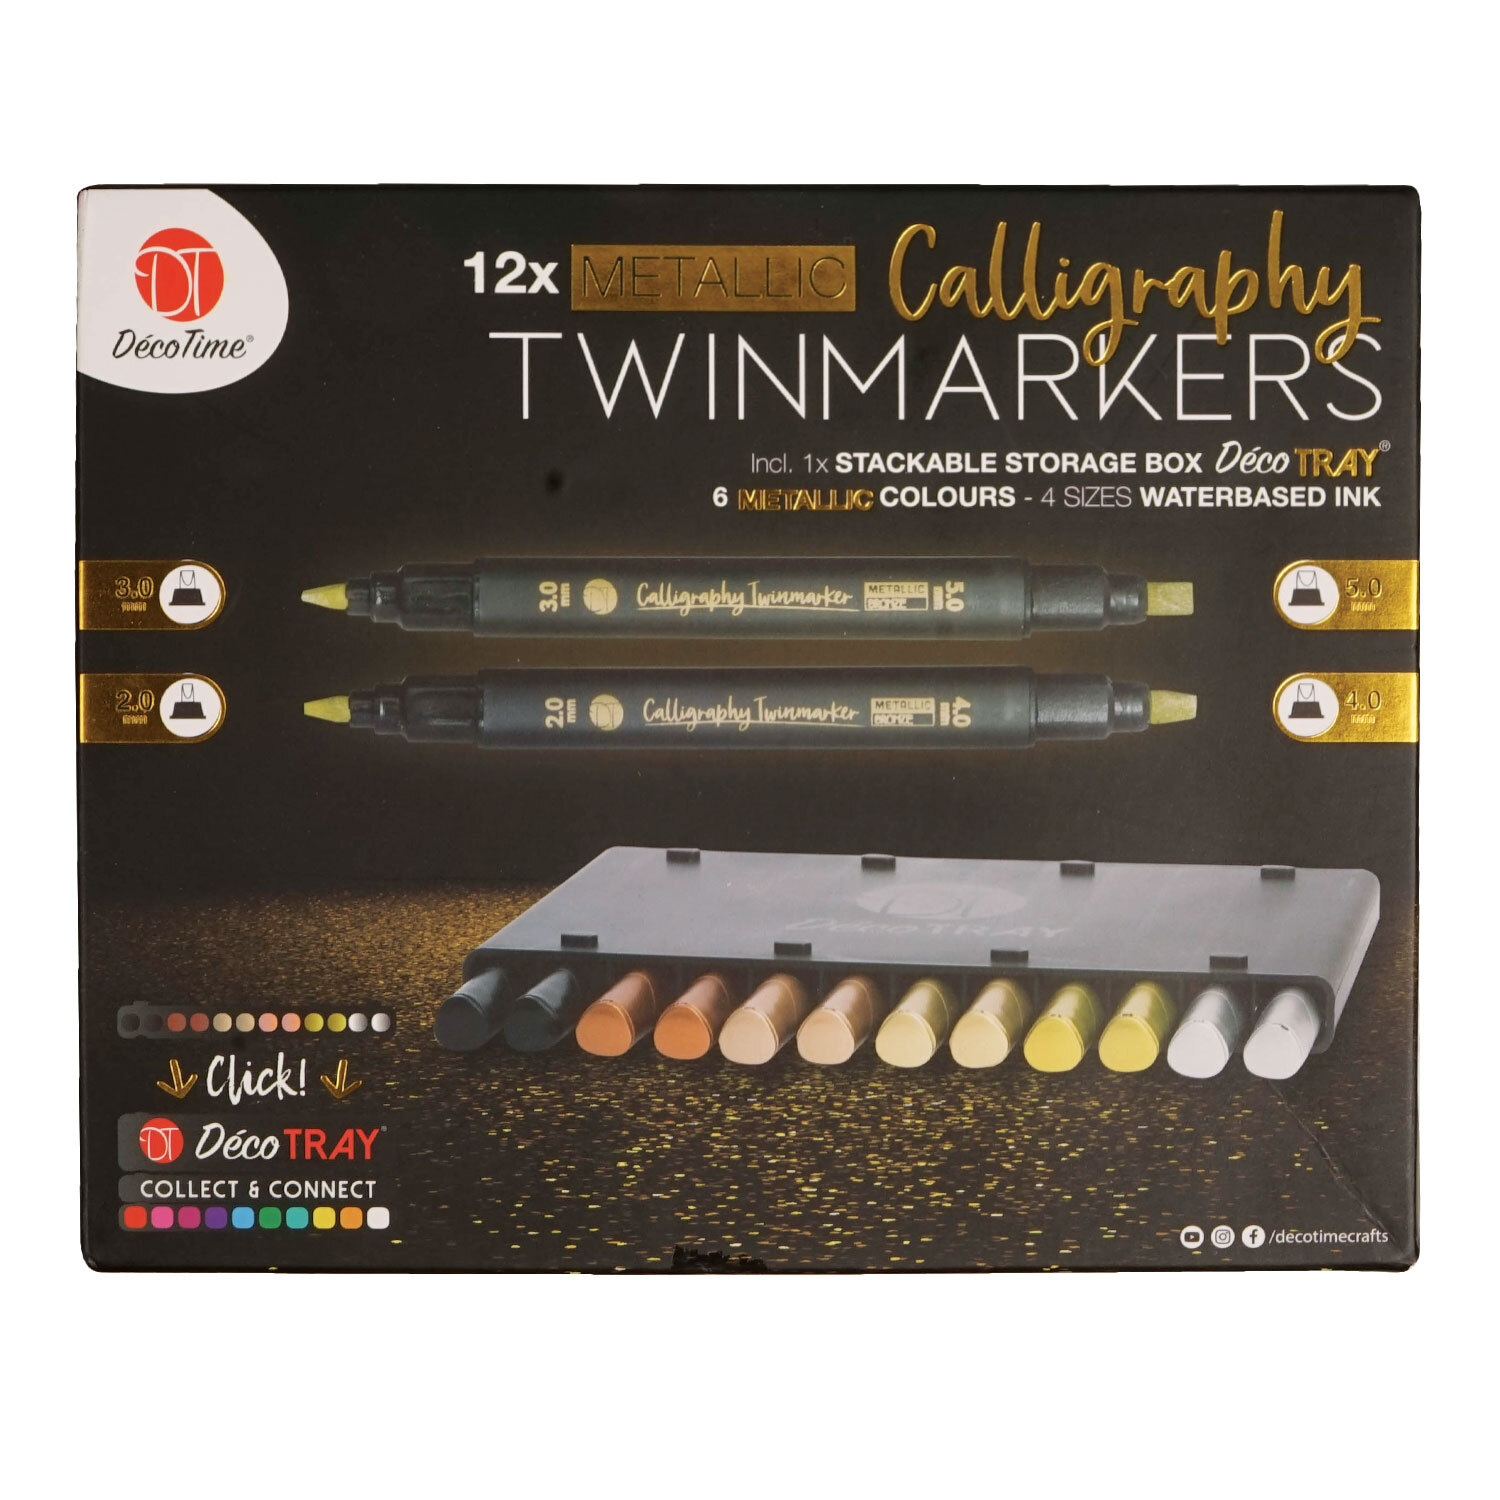 DecoTime Calligraphy Metallic Twin Marker Pen 12 Pack Image